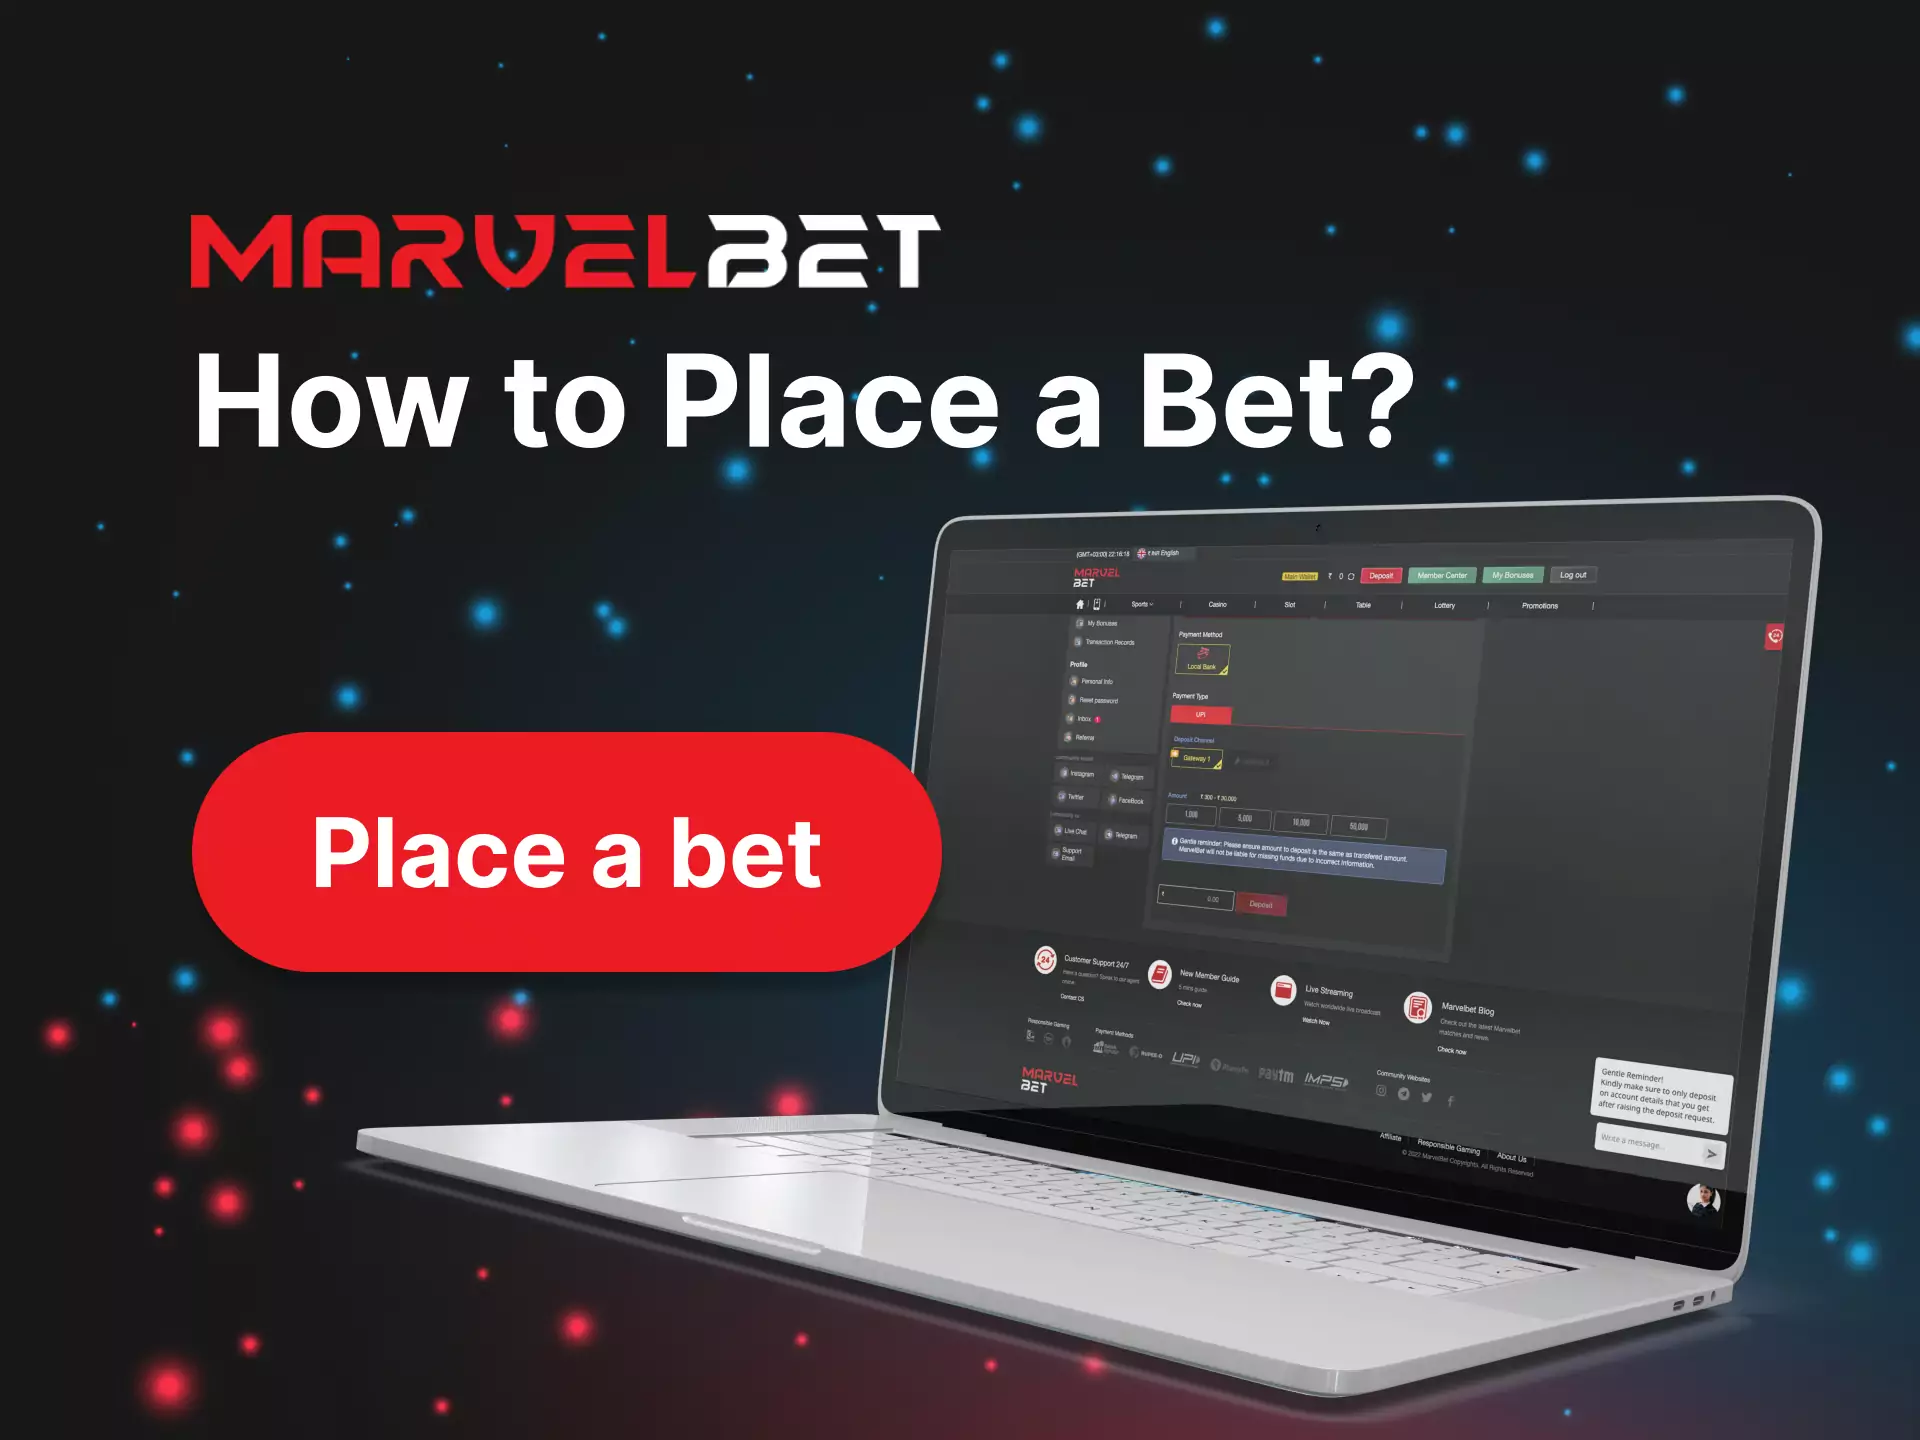 To place a bet, choose an available match on Marvelbet and predict the result.